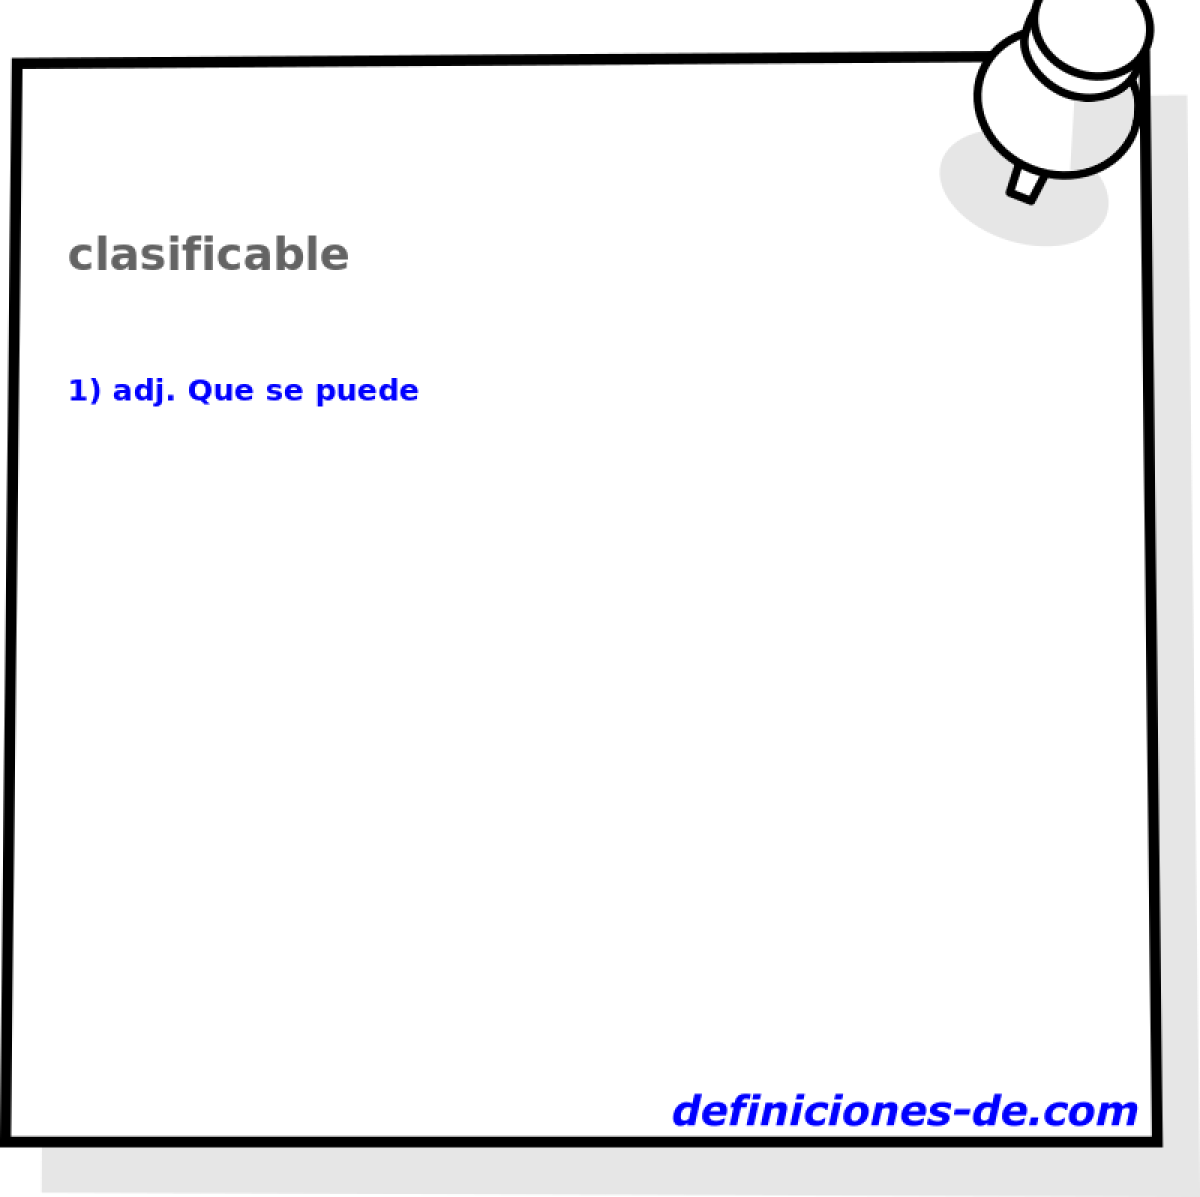 clasificable 